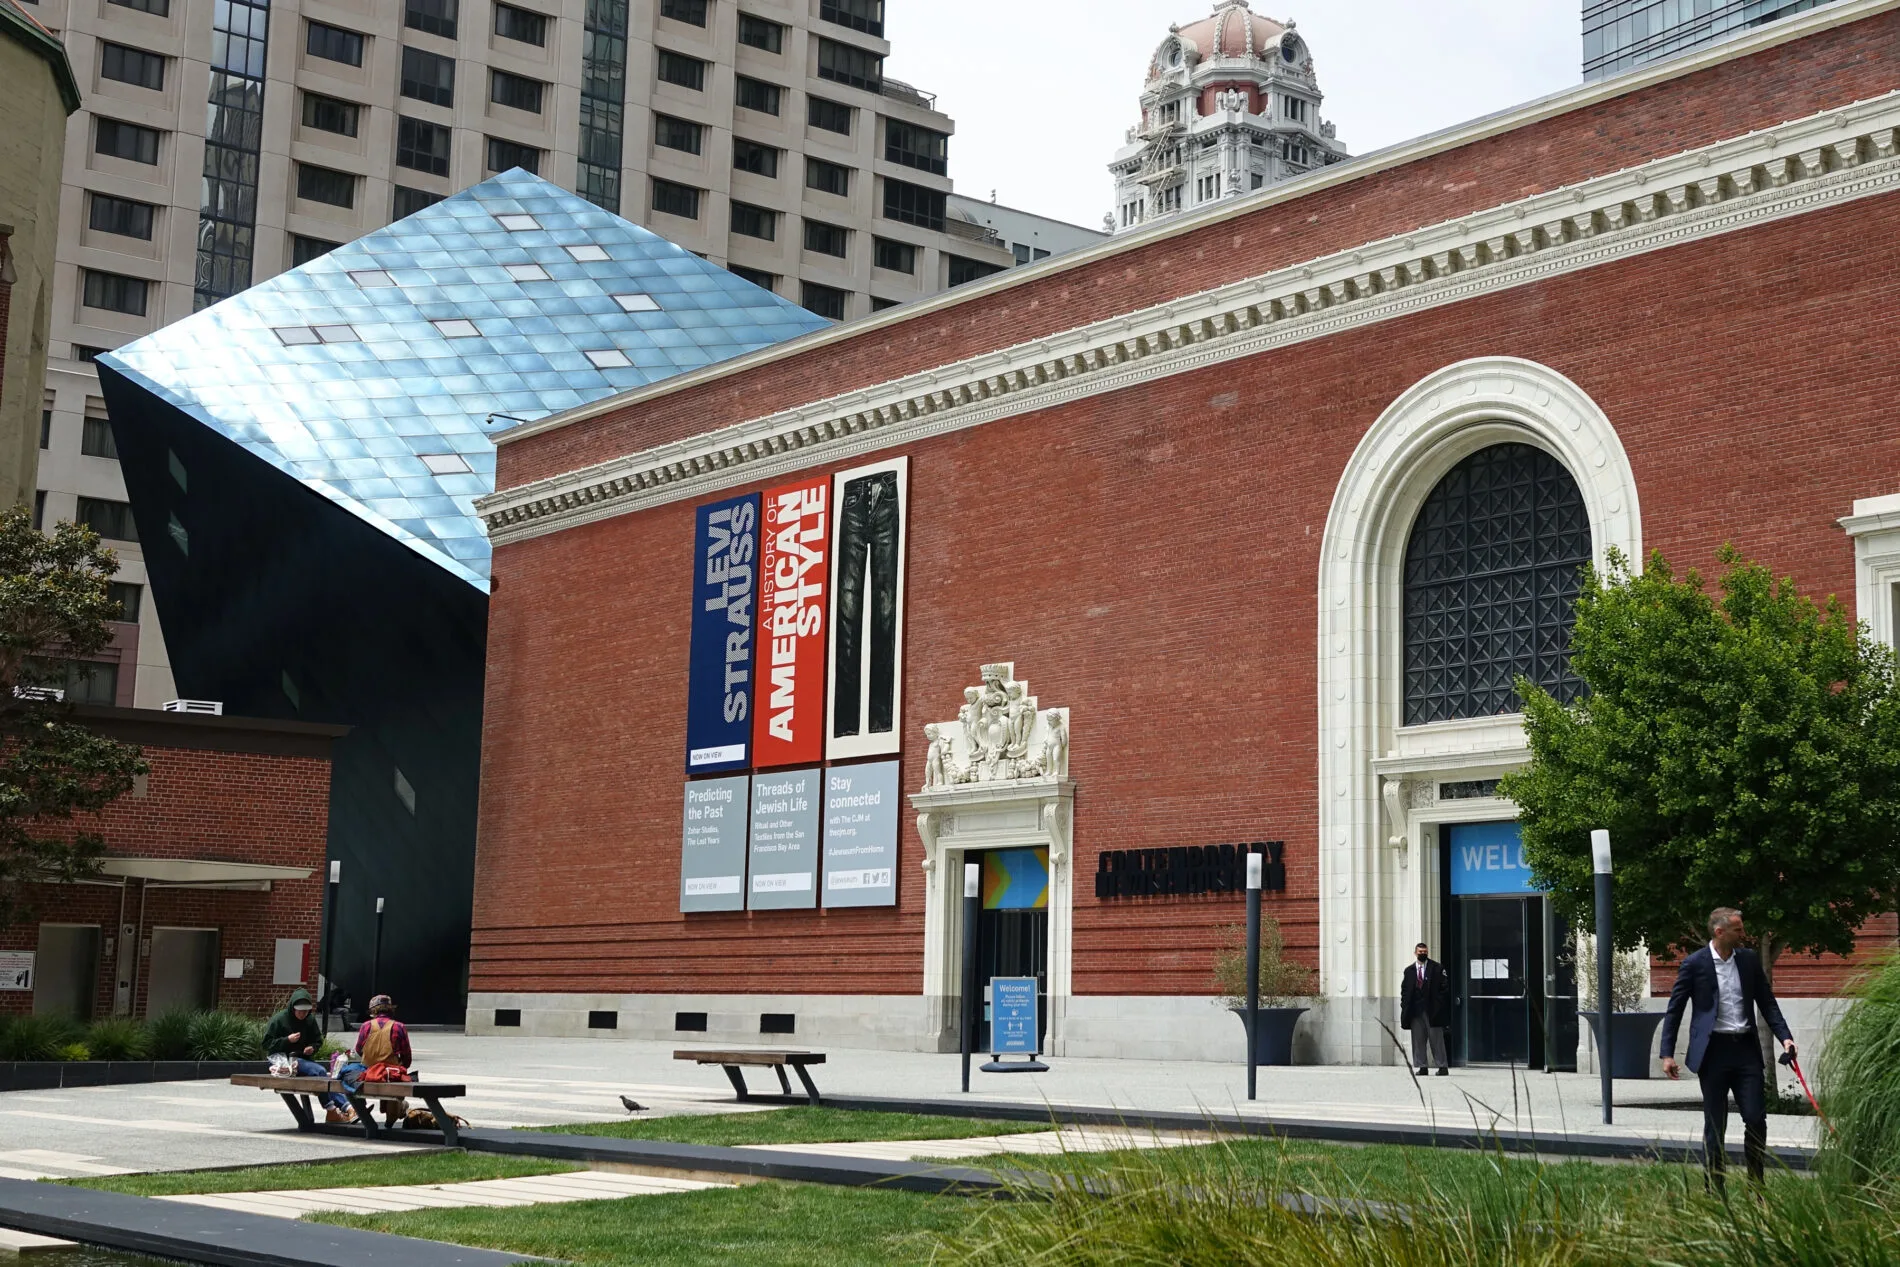 Striking Contemporary Jewish Museum building with a modern blue steal cube addition added to a restored brick powerhouse.